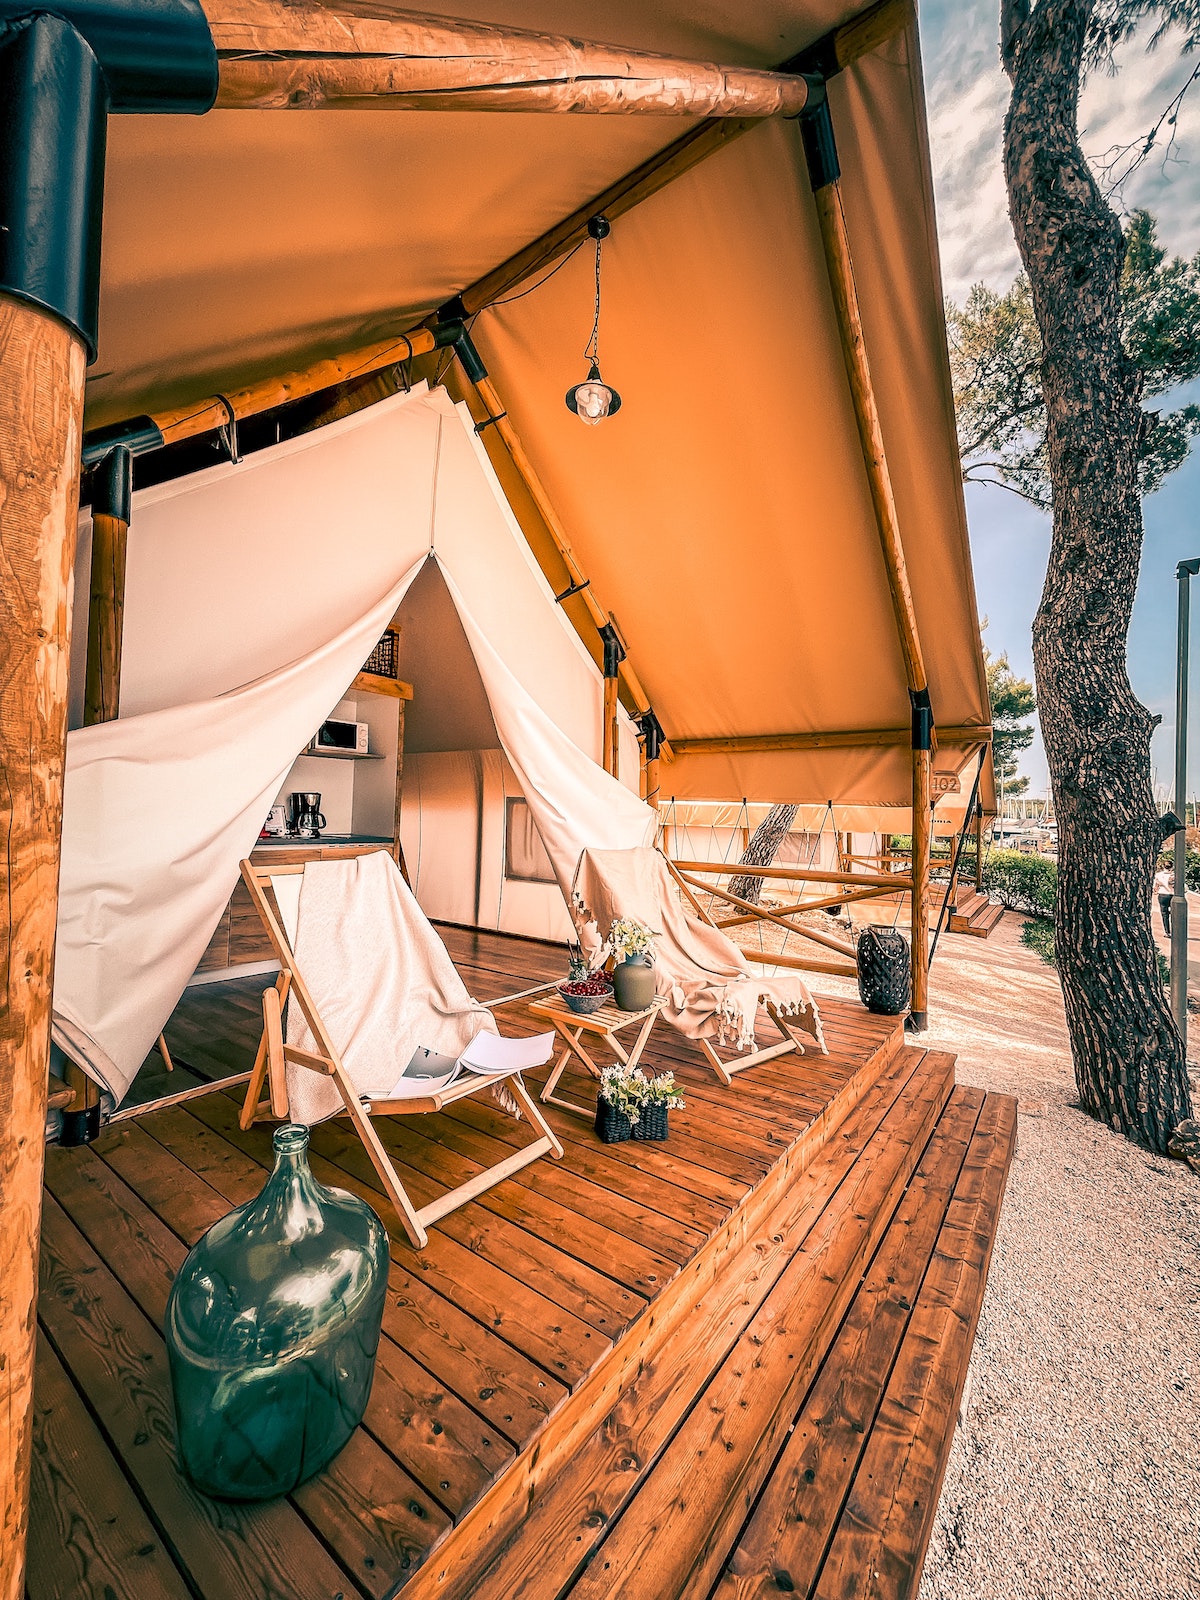 Get the benefits of being in nature with nice amenities via glamping tents like this